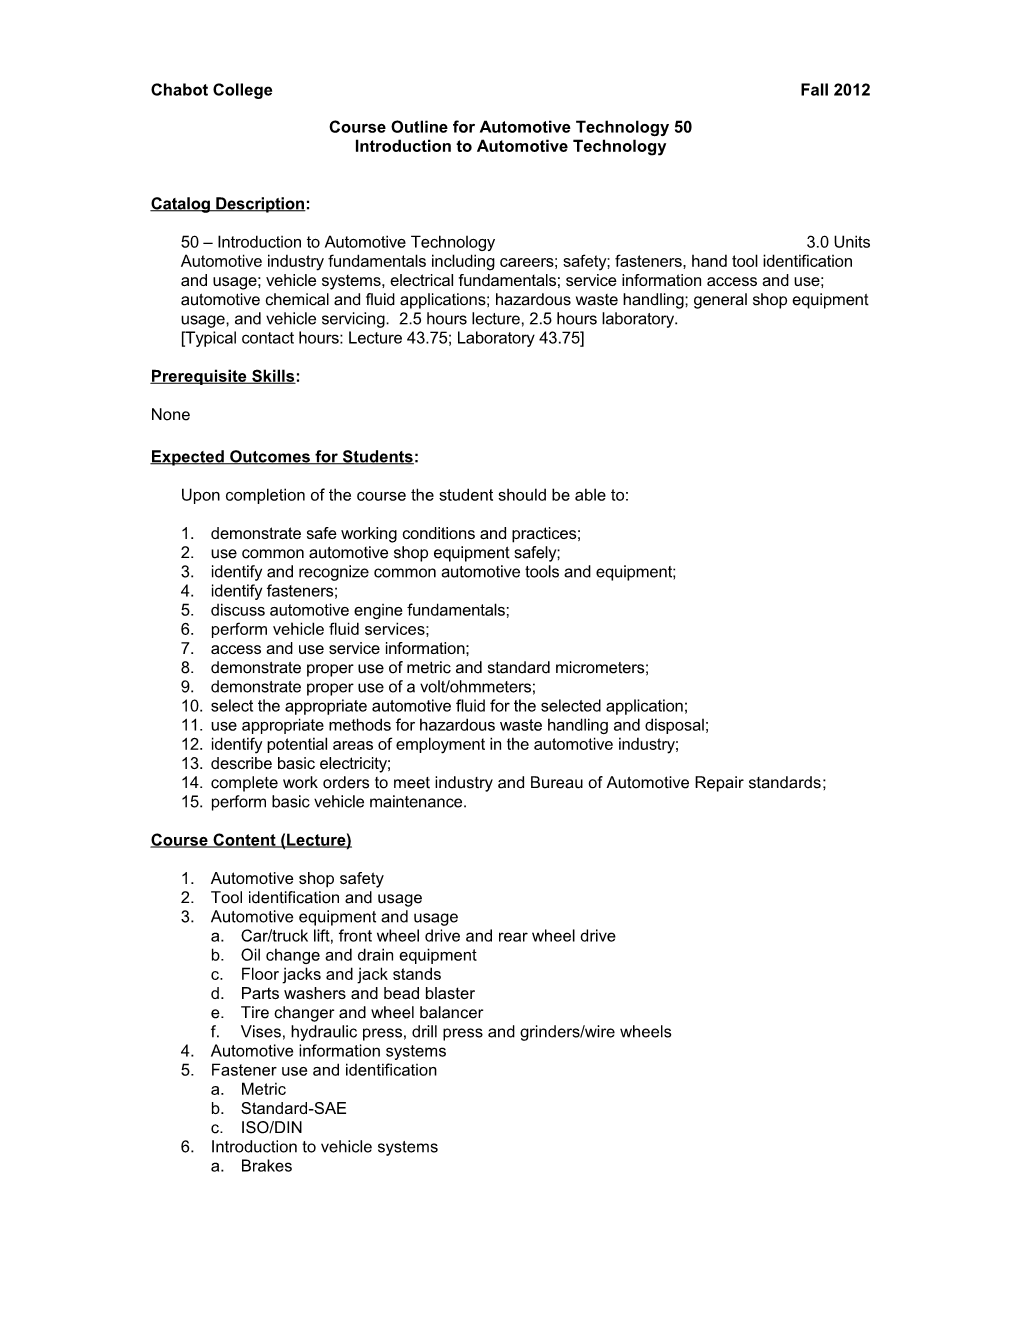 Course Outline for Automotive Technology 50, Page 1